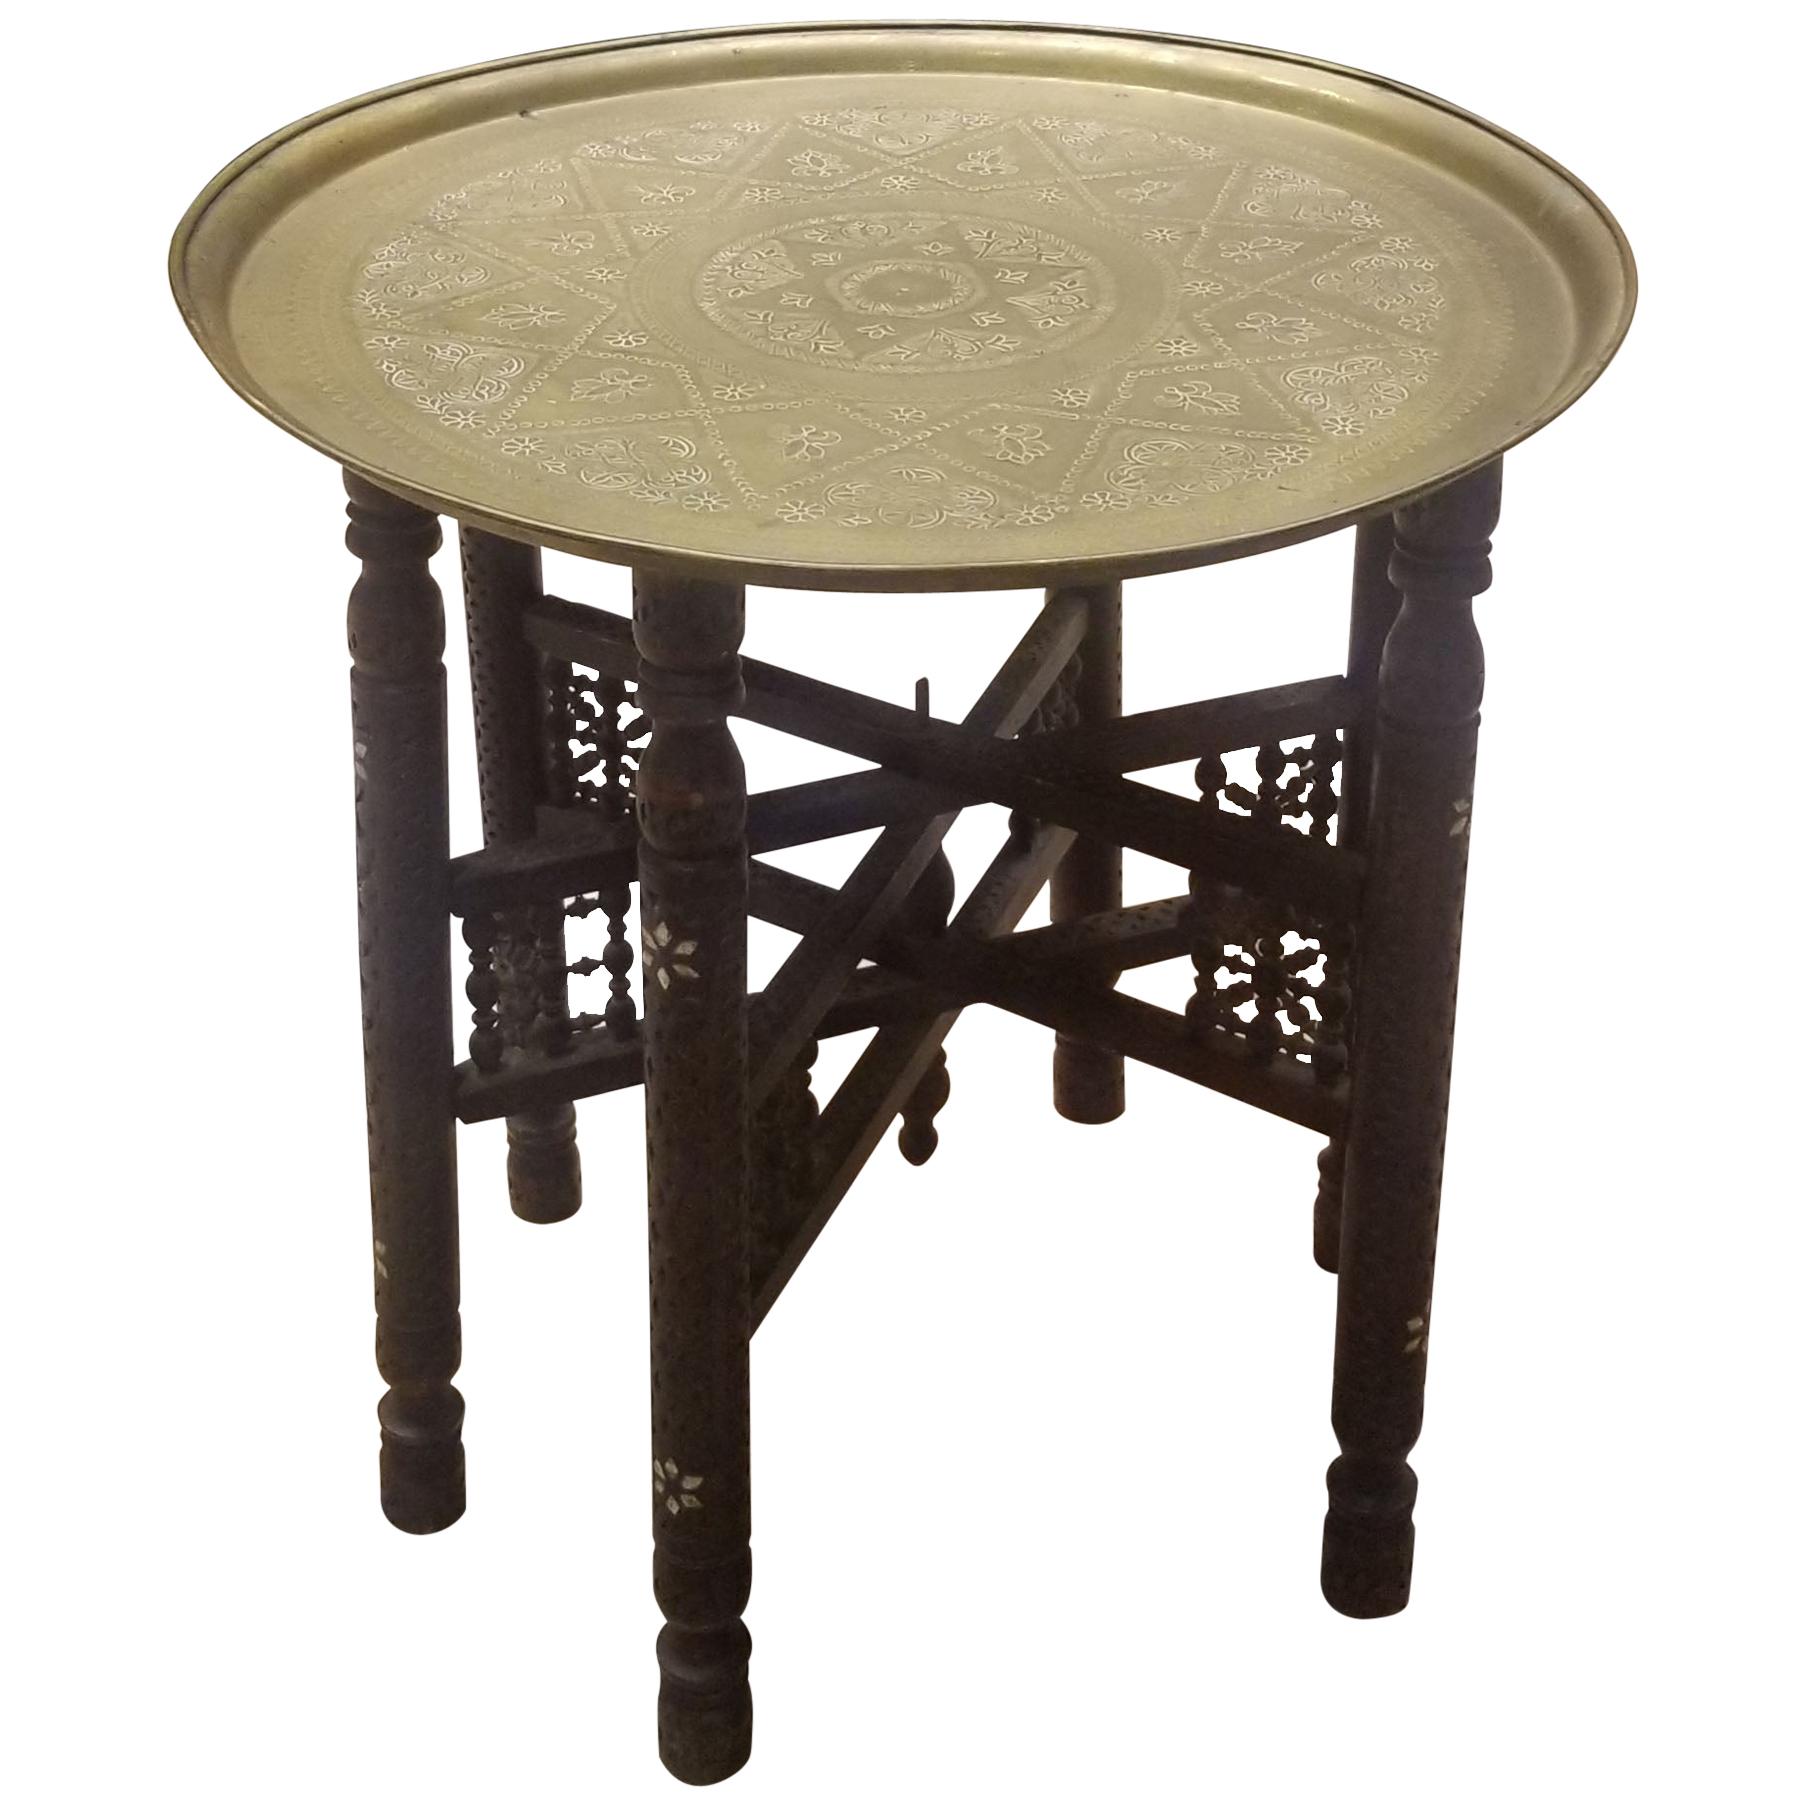 Moroccan Copper Coffee Table, Round with Wooden Folding Base